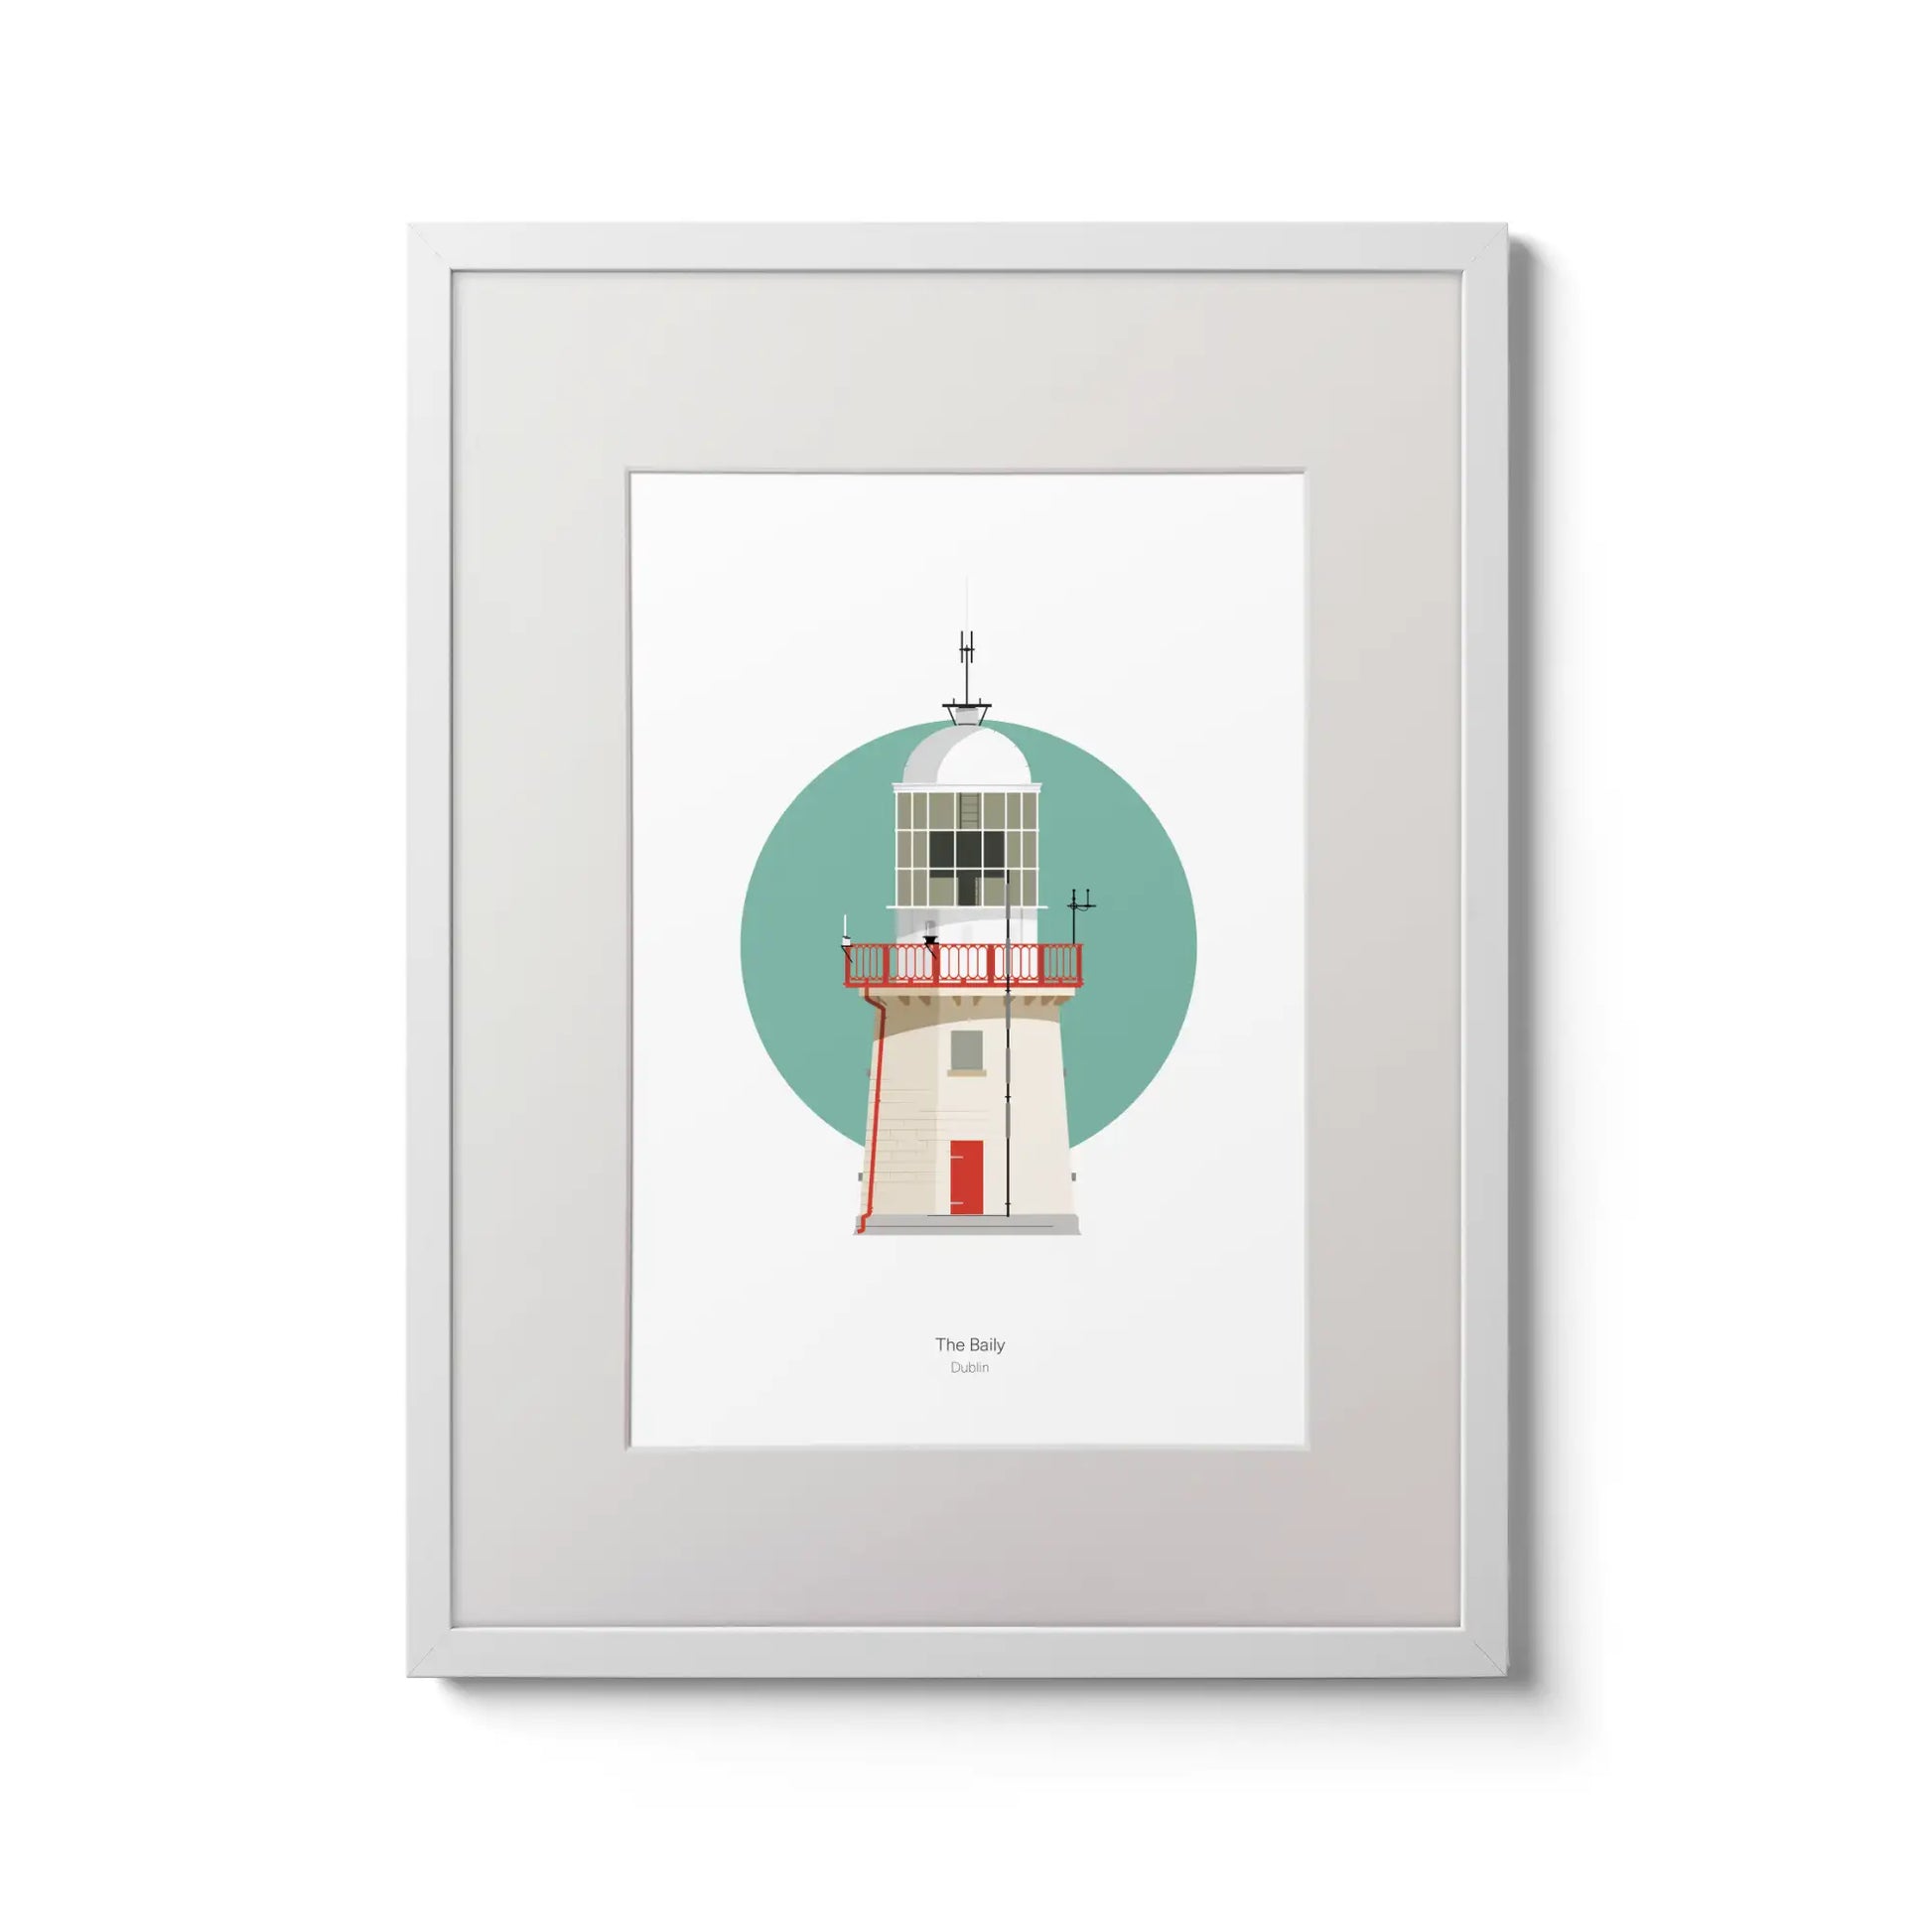 Illustration of The Baily lighthouse on a white background inside light blue square,  in a white frame measuring 30x40cm.